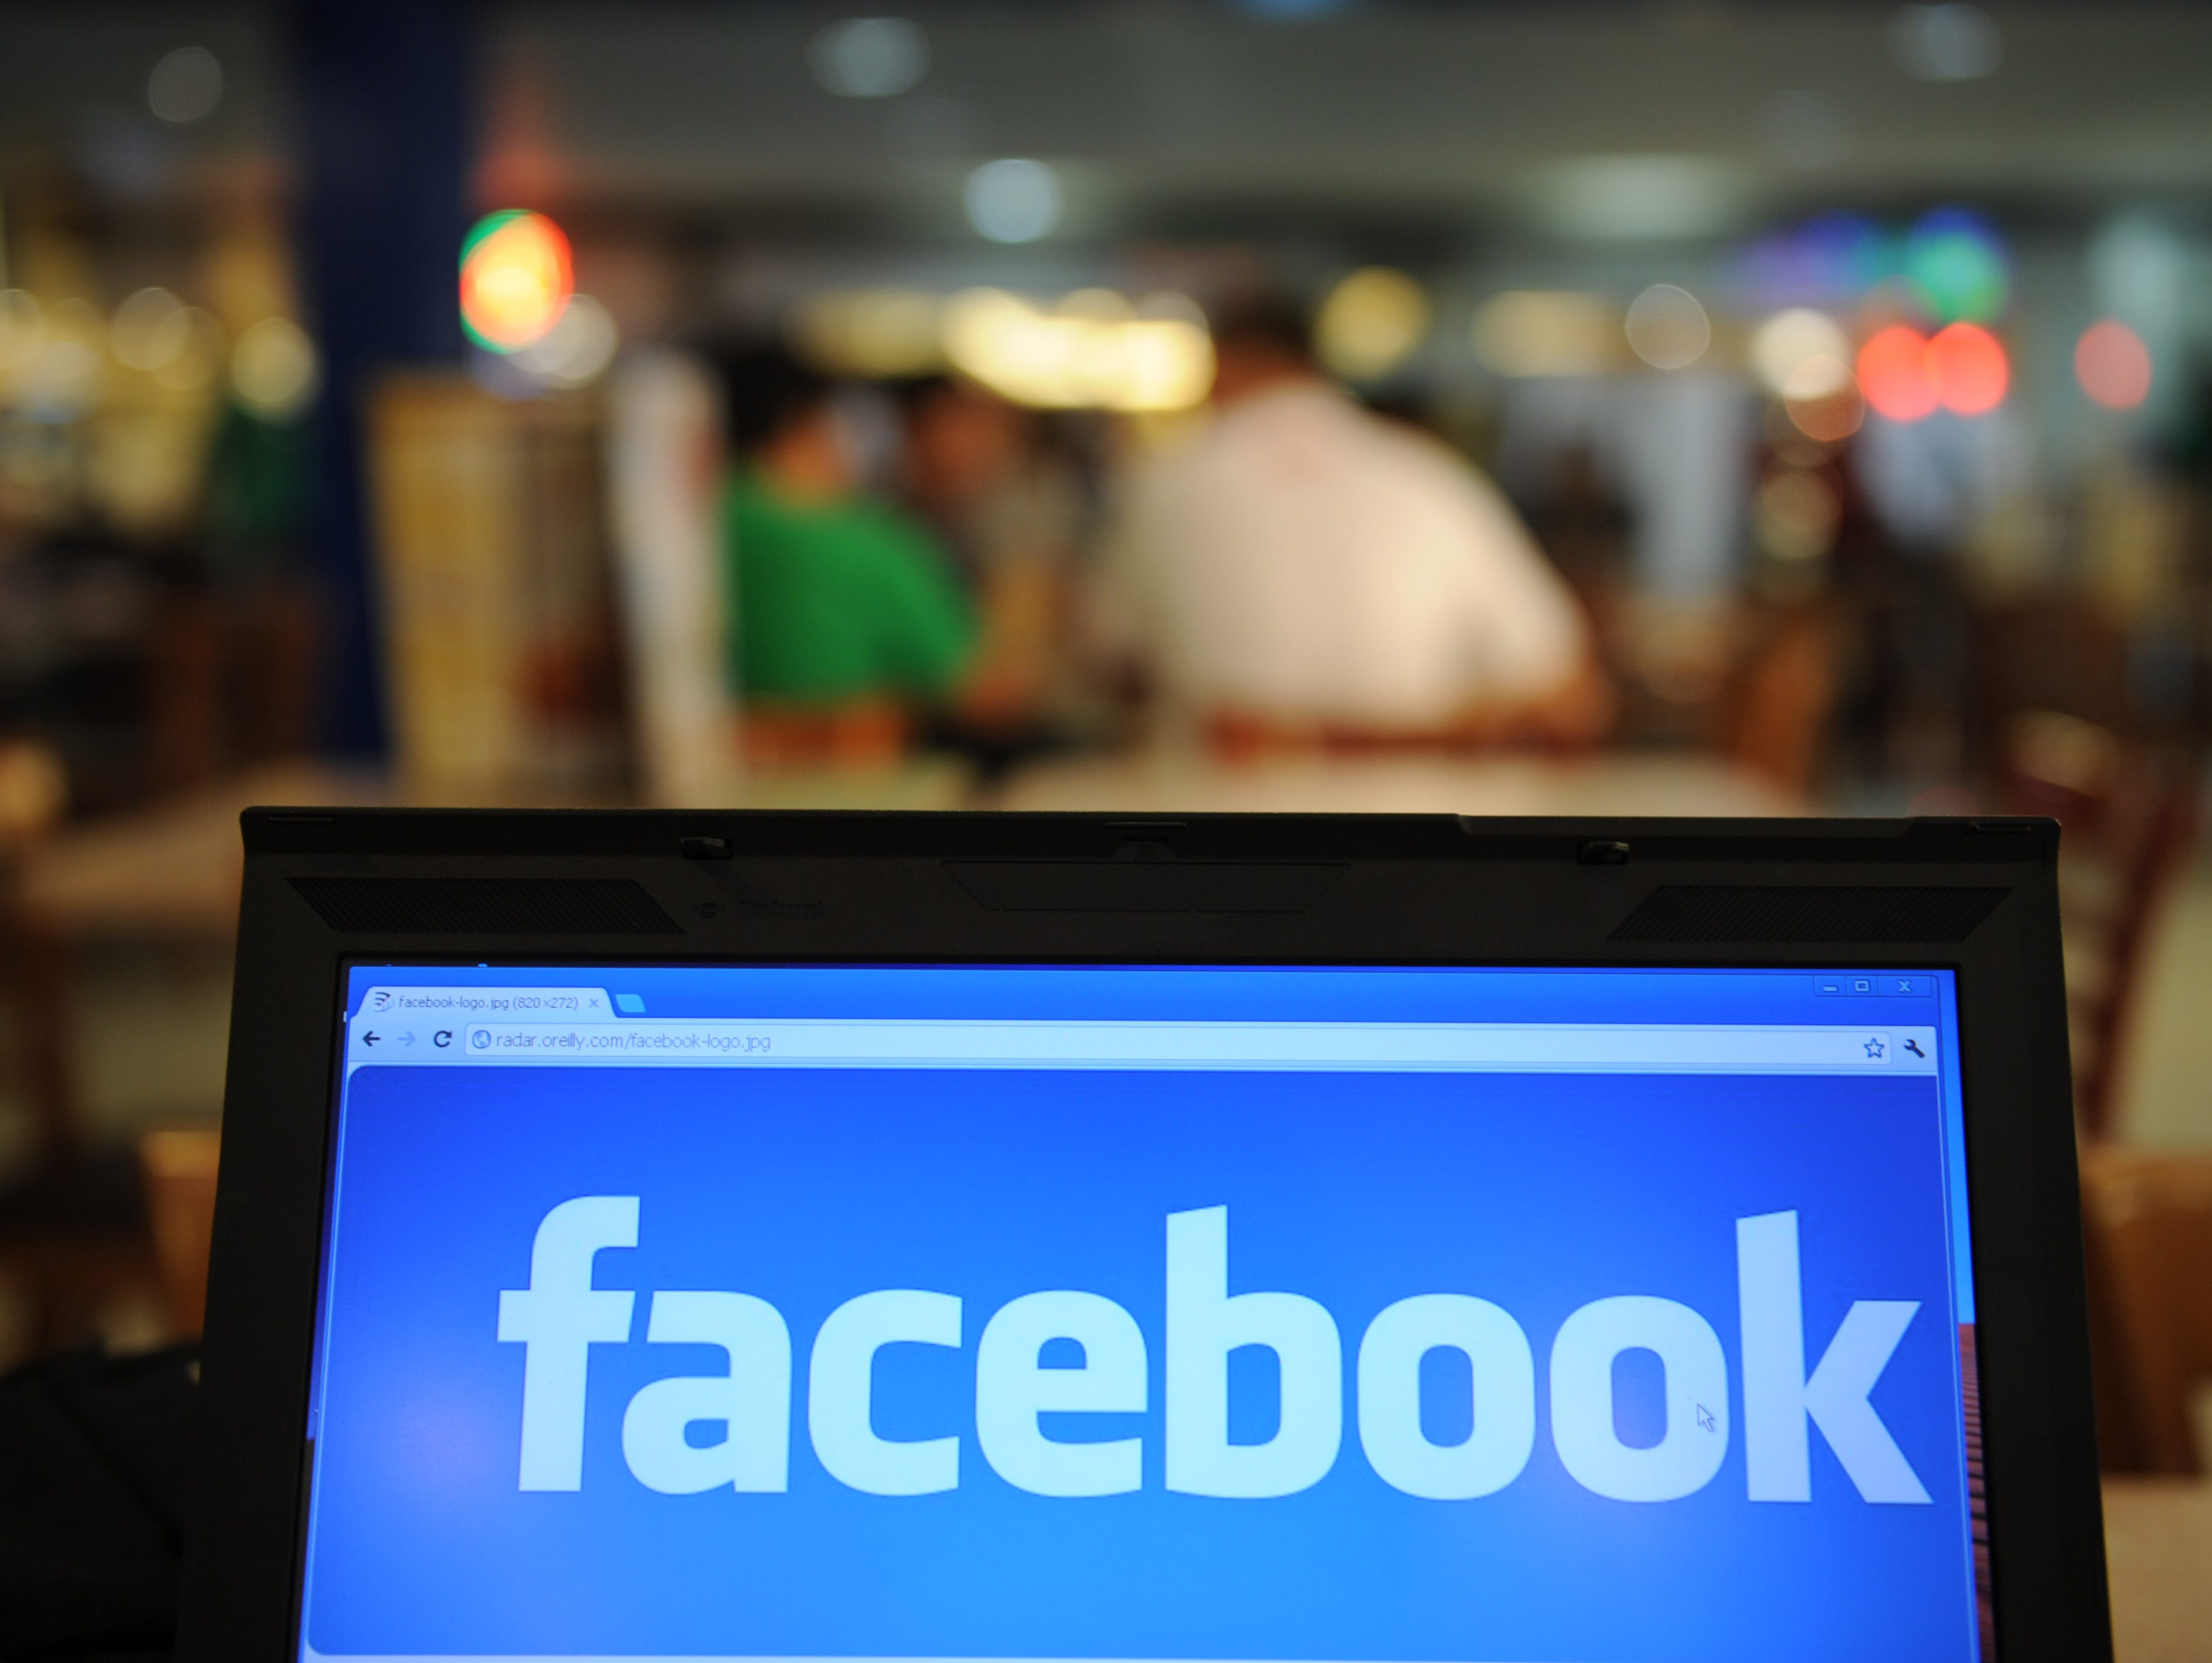 A logo of social networking Facebook is displayed on a laptop screen inside a restaurant in Manila.